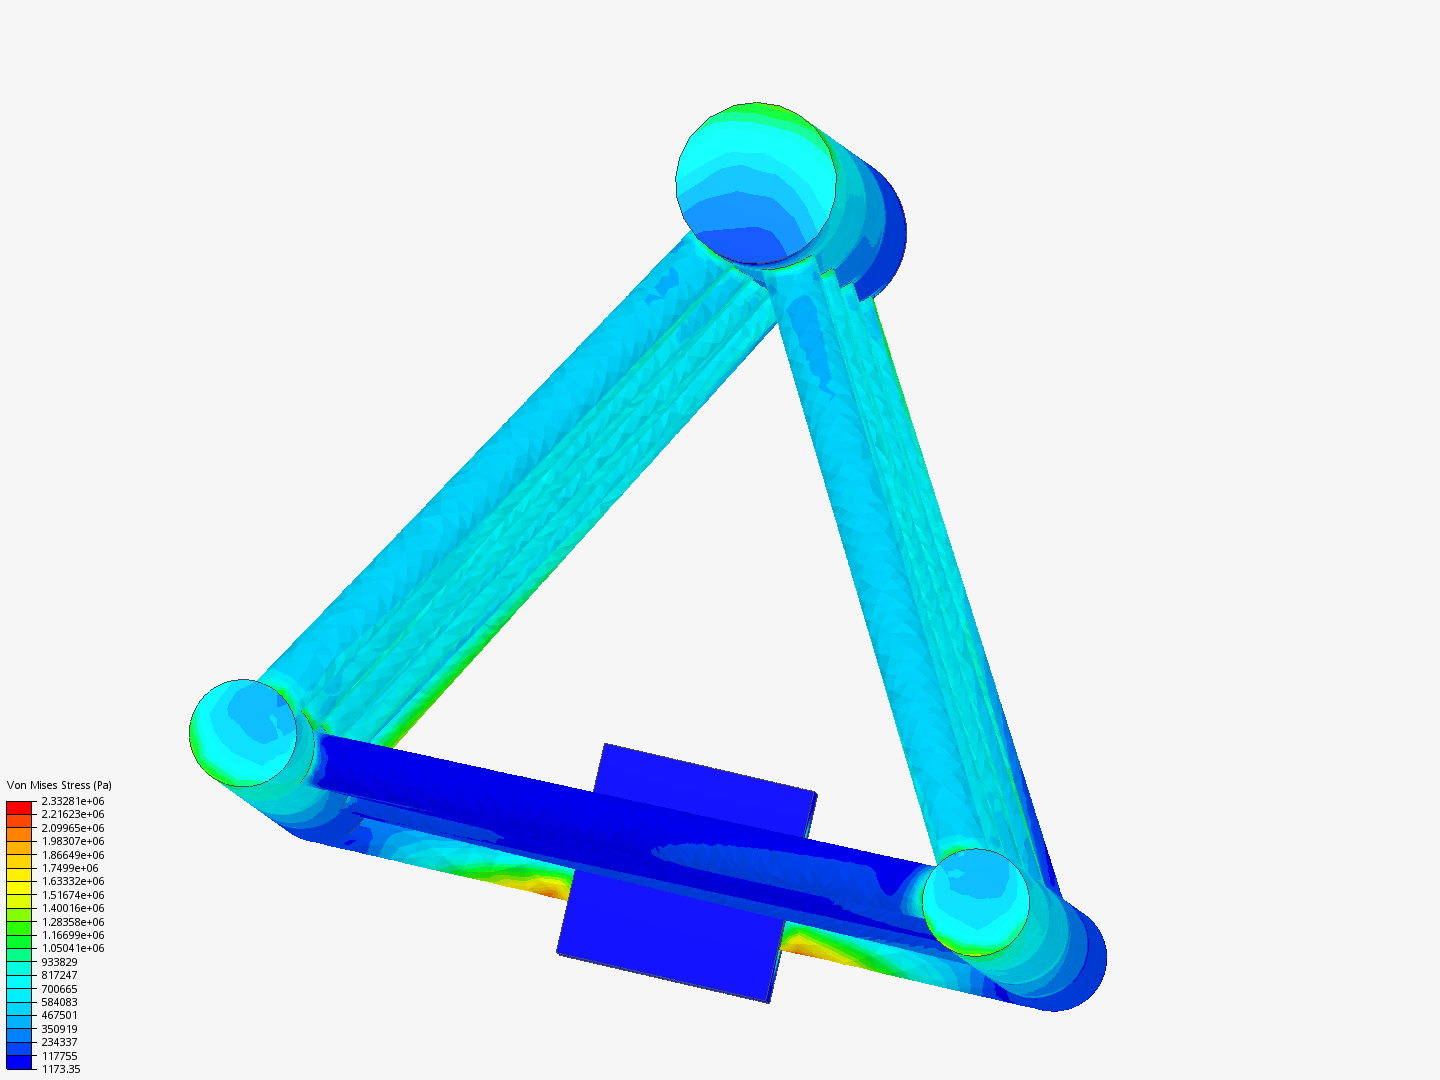 Structural analysis trial file image